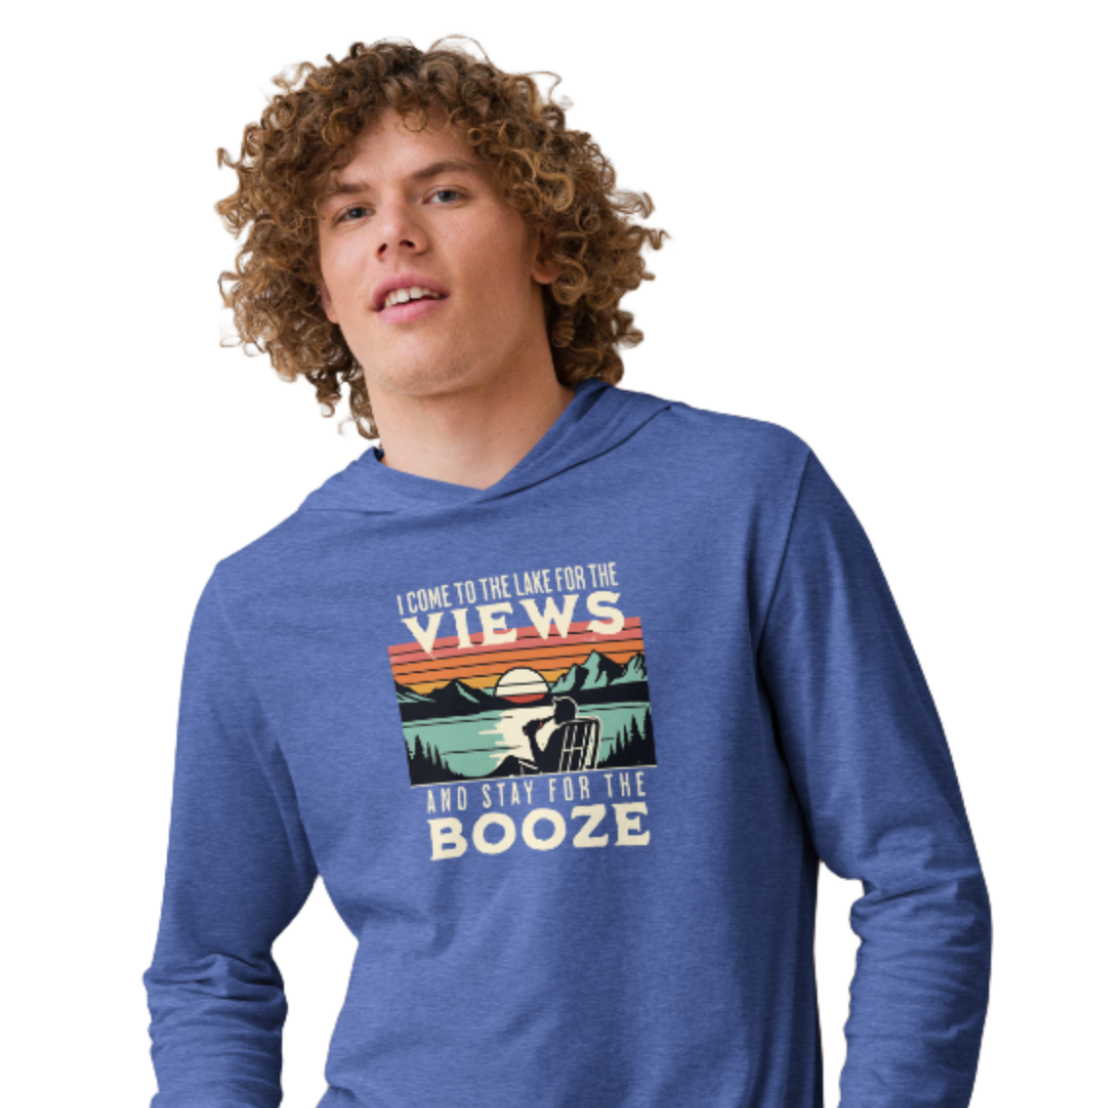 Lightweight hoodie featuring "I Come to the Lake for the Views and Stay for the Booze" with a man in a beach chair, lake, and retro sunset.